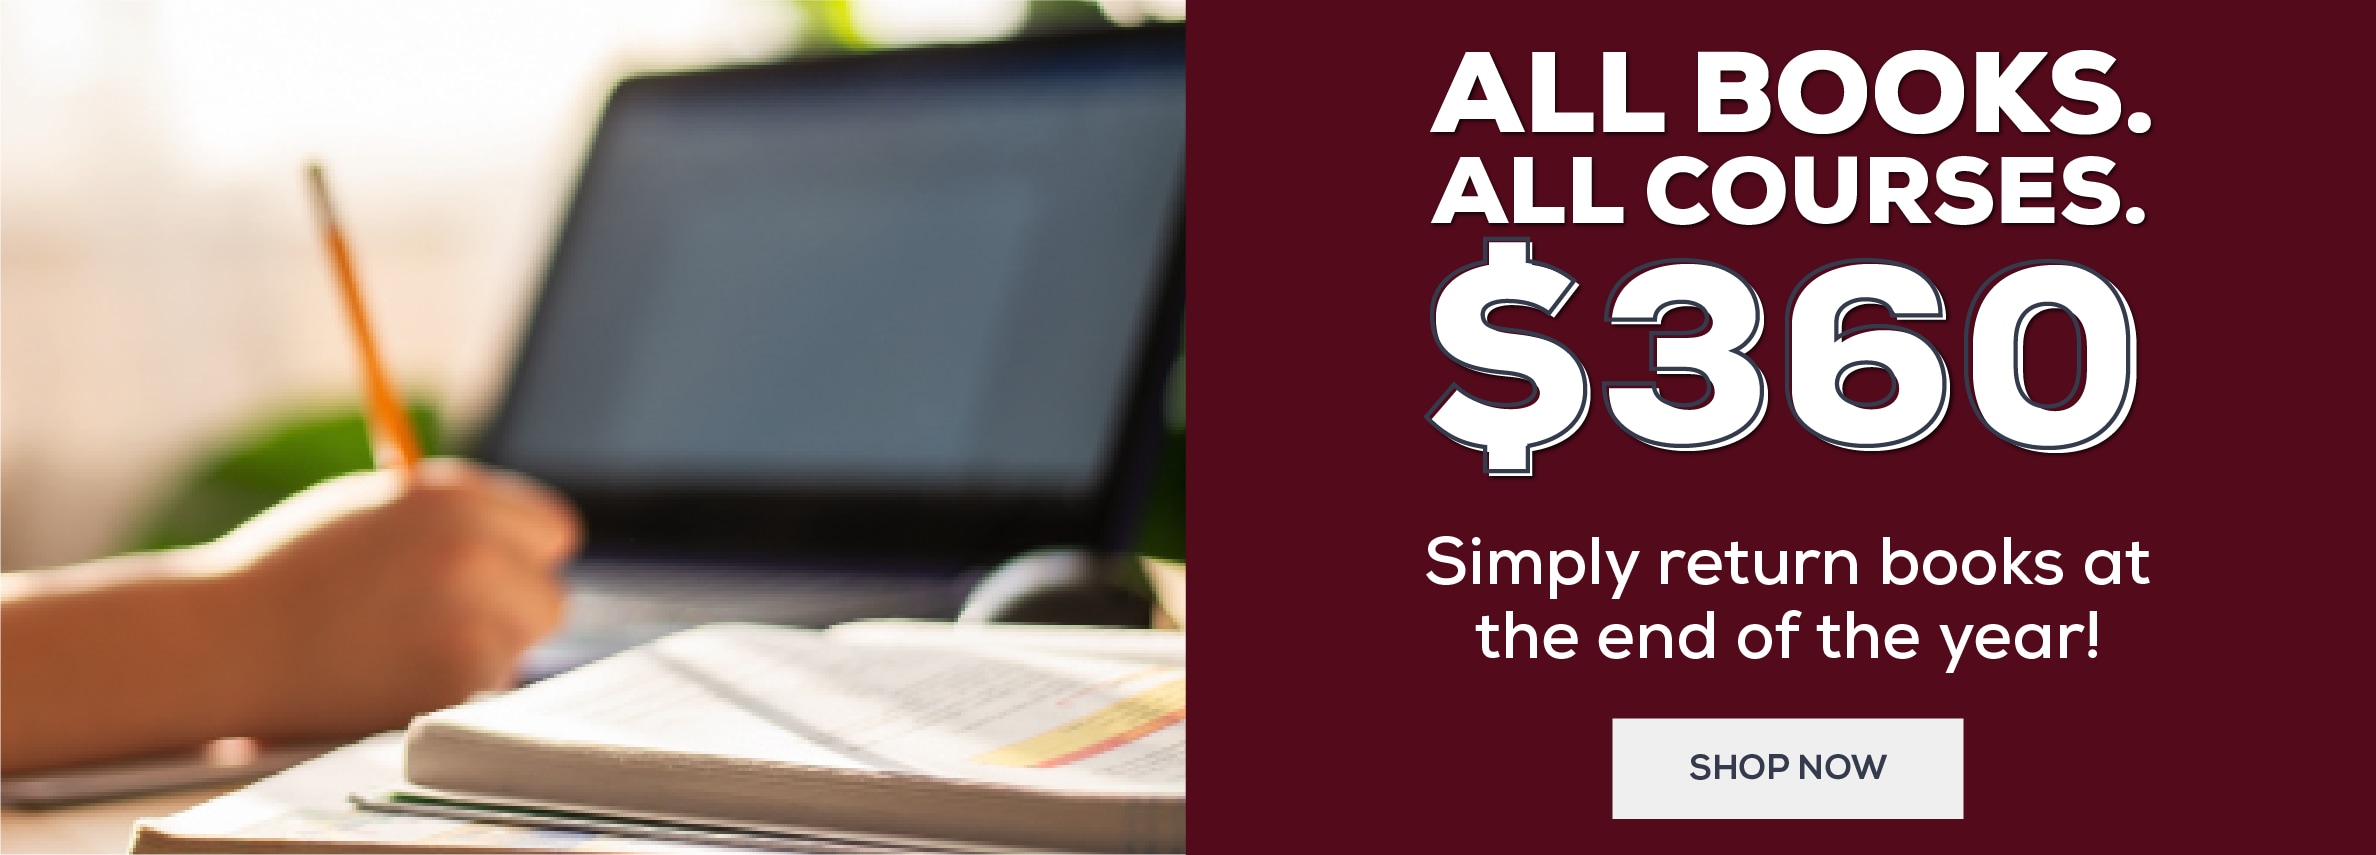 All Books. All Courses. One Low Price. Simply return books at the end of the year! Shop now $360 Bundle